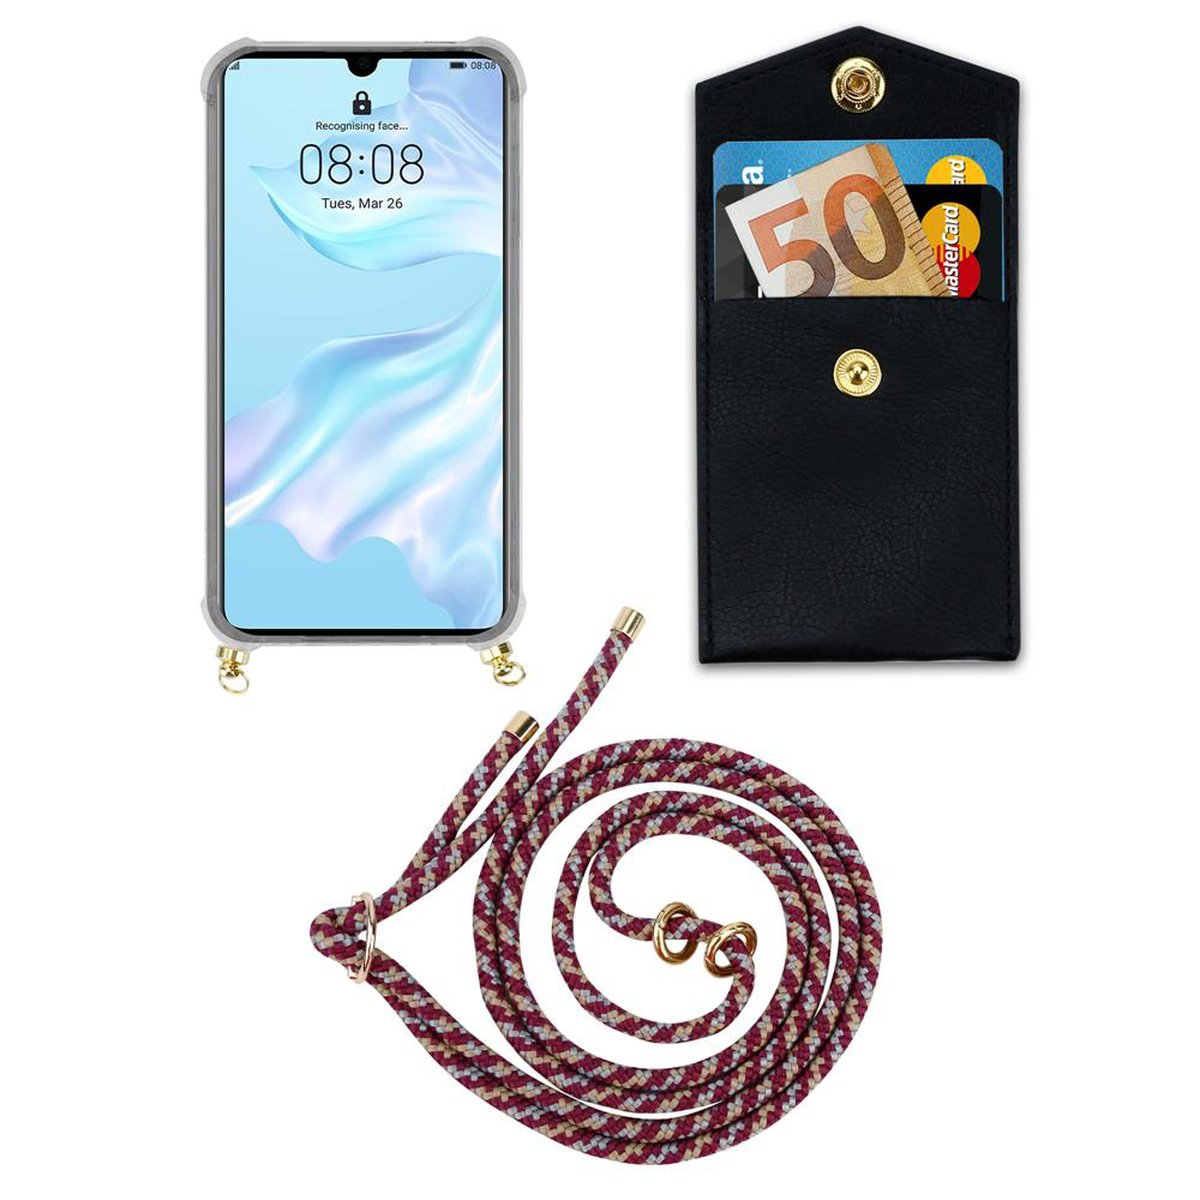 CADORABO Handy Kette Huawei, Ringen, und Band Kordel Backcover, abnehmbarer P30, WEIß mit Hülle, Gold ROT GELB